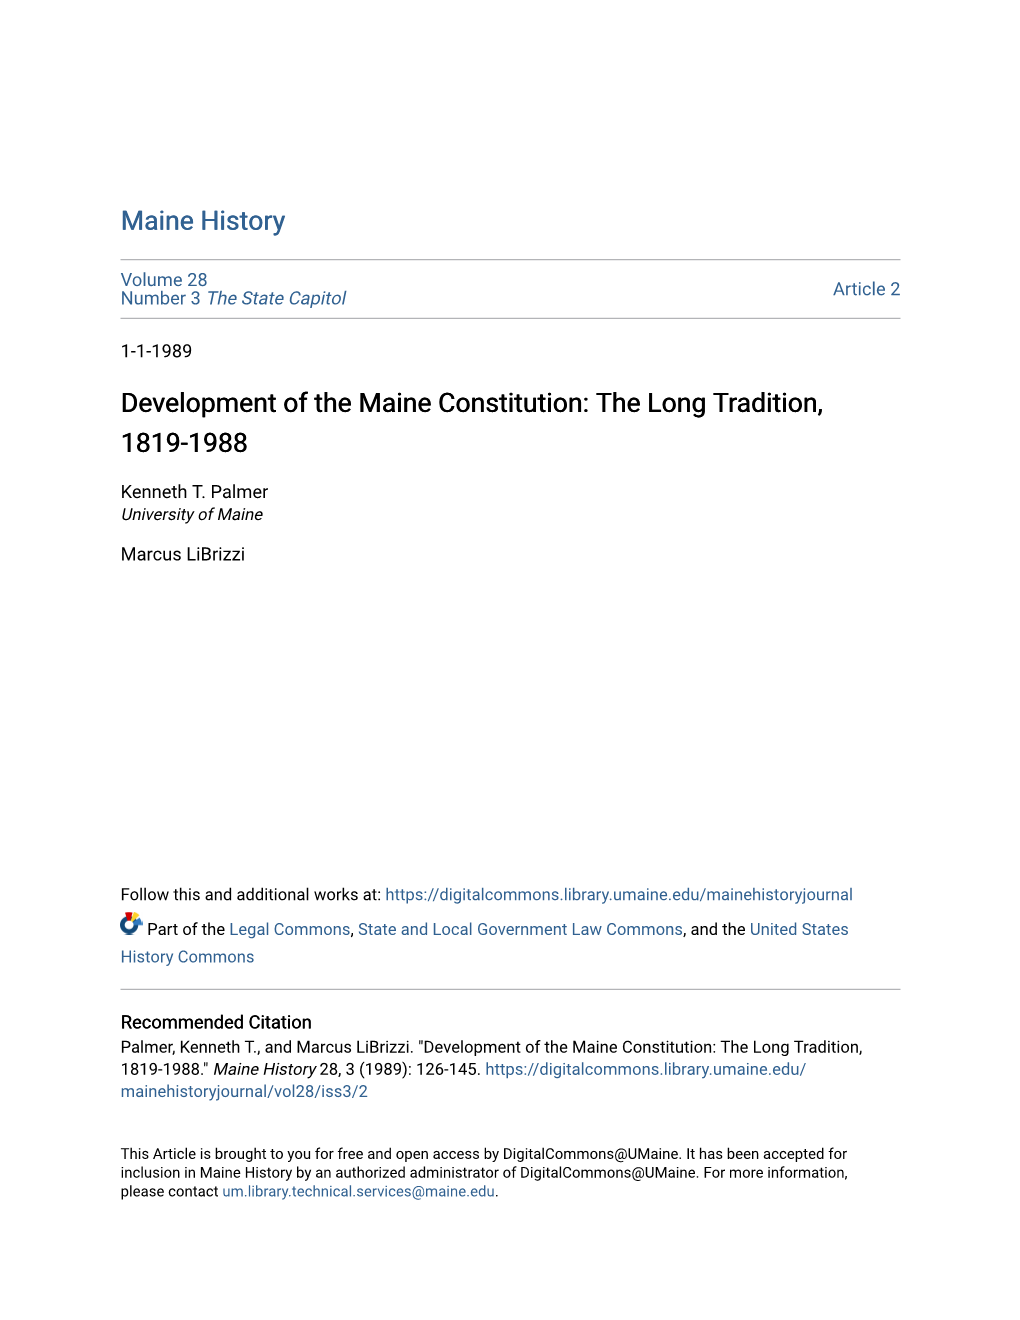 Development of the Maine Constitution: the Long Tradition, 1819-1988